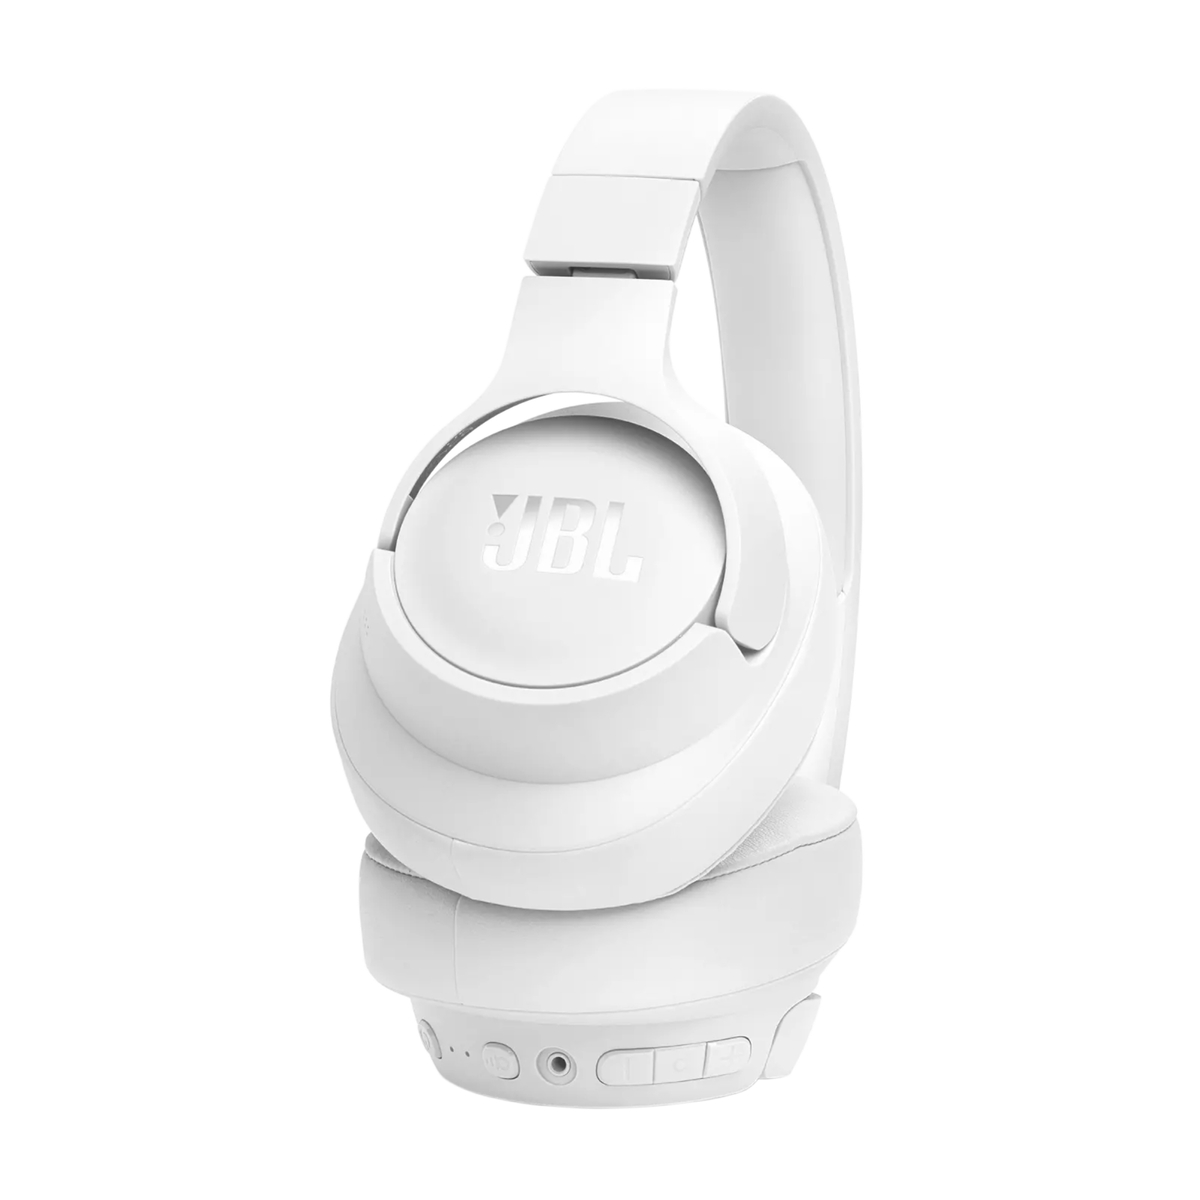 JBL TUNE 770NC Wireless Over-Ear Headphones with True Adaptive Noise Cancelling White